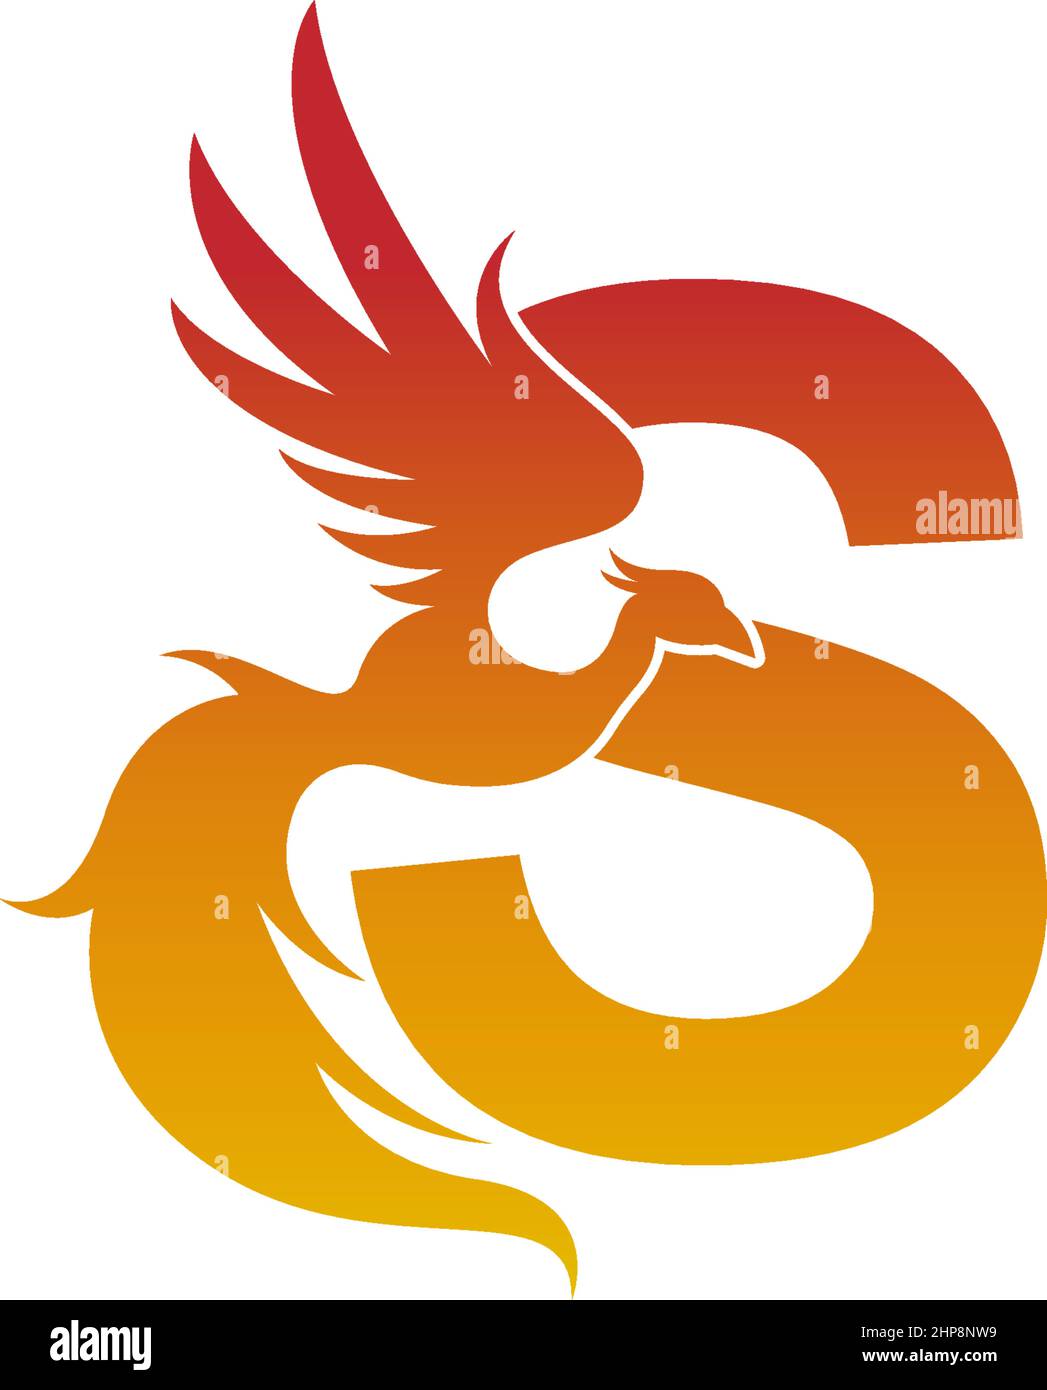 Letter S icon with phoenix logo design template Stock Vector